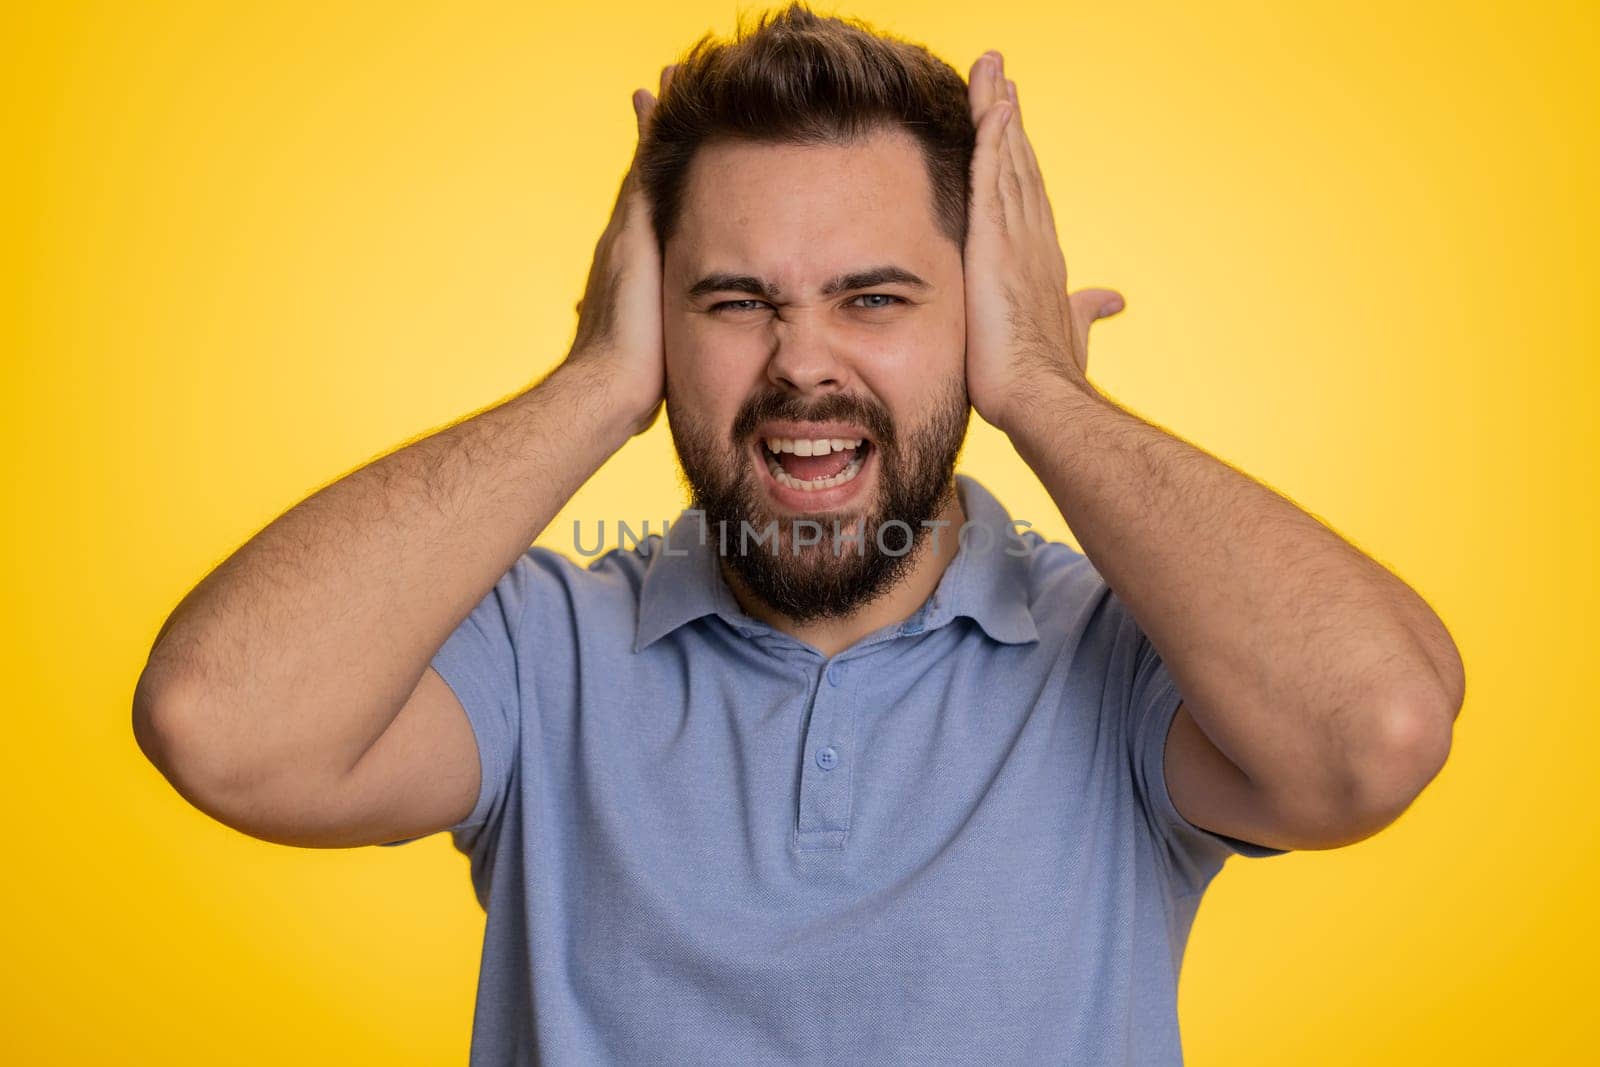 Dont want to hear and listen. Frustrated annoyed irritated caucasian man covering ears gesturing No, avoiding advice ignoring unpleasant noise loud voices. Handsome guy alone on yellow background